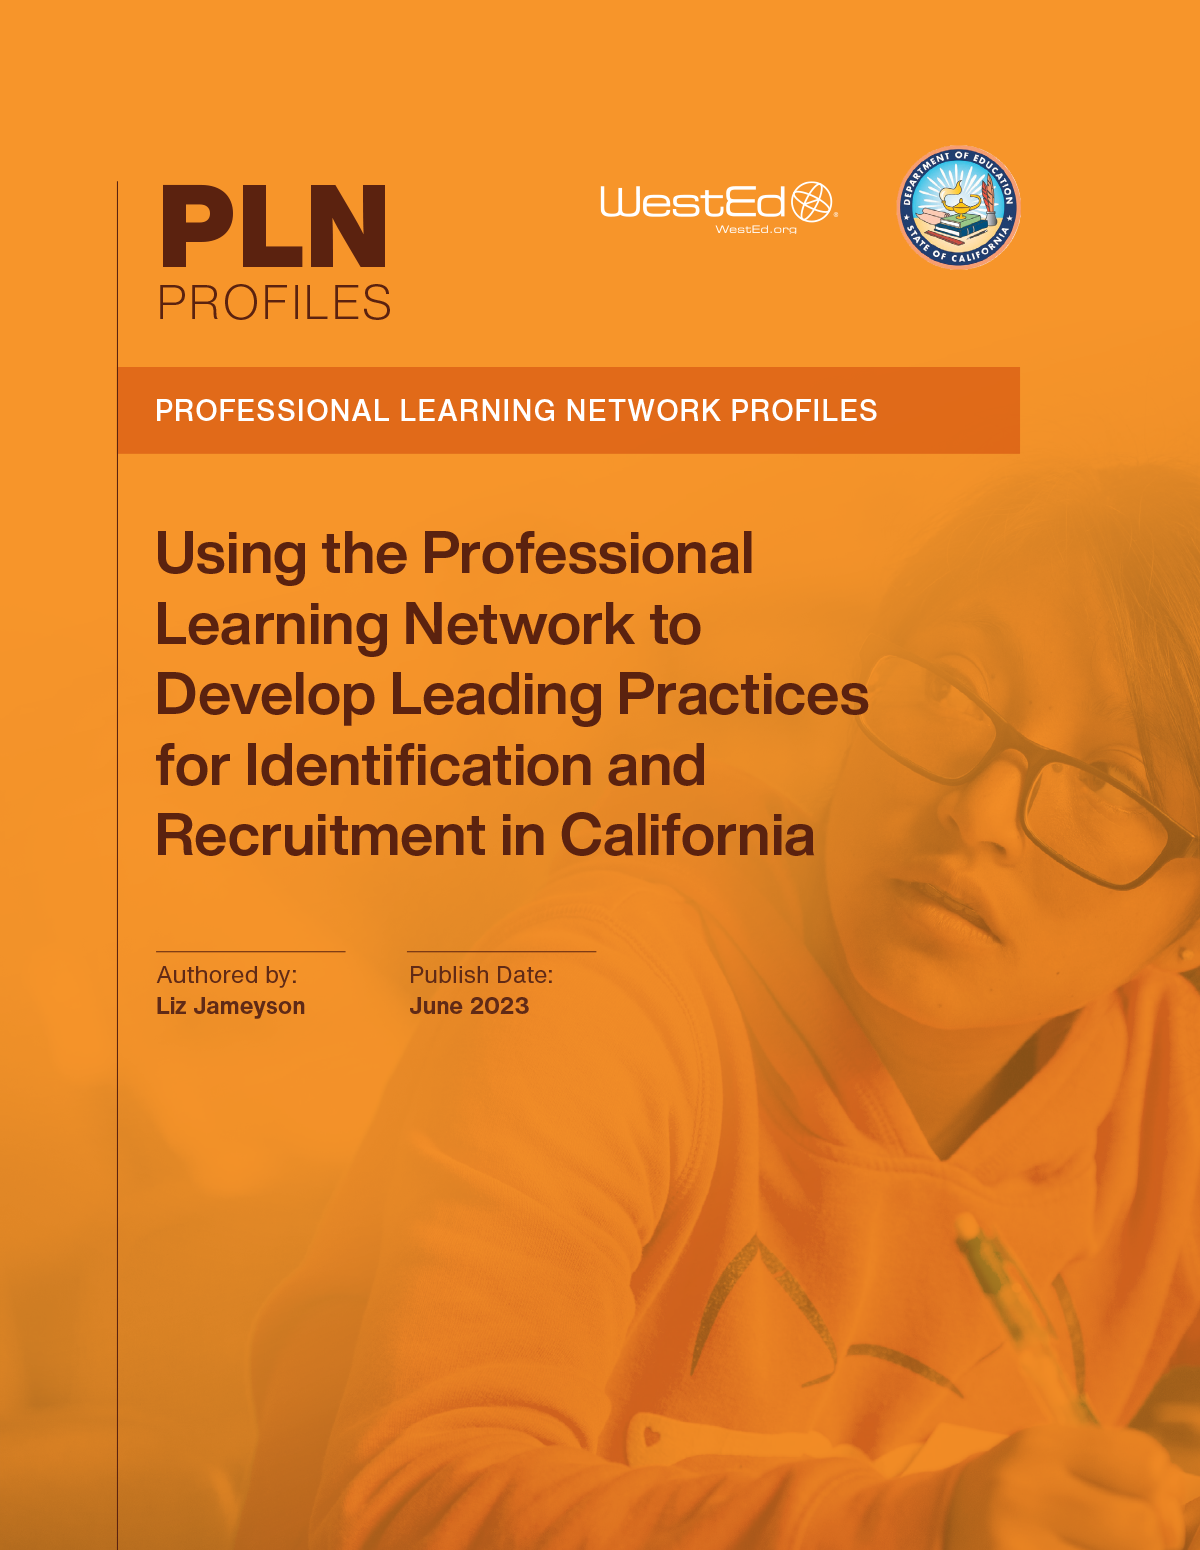 Using the Professional Learning Network to Develop Leading Practices for Identification and Recruitment in California